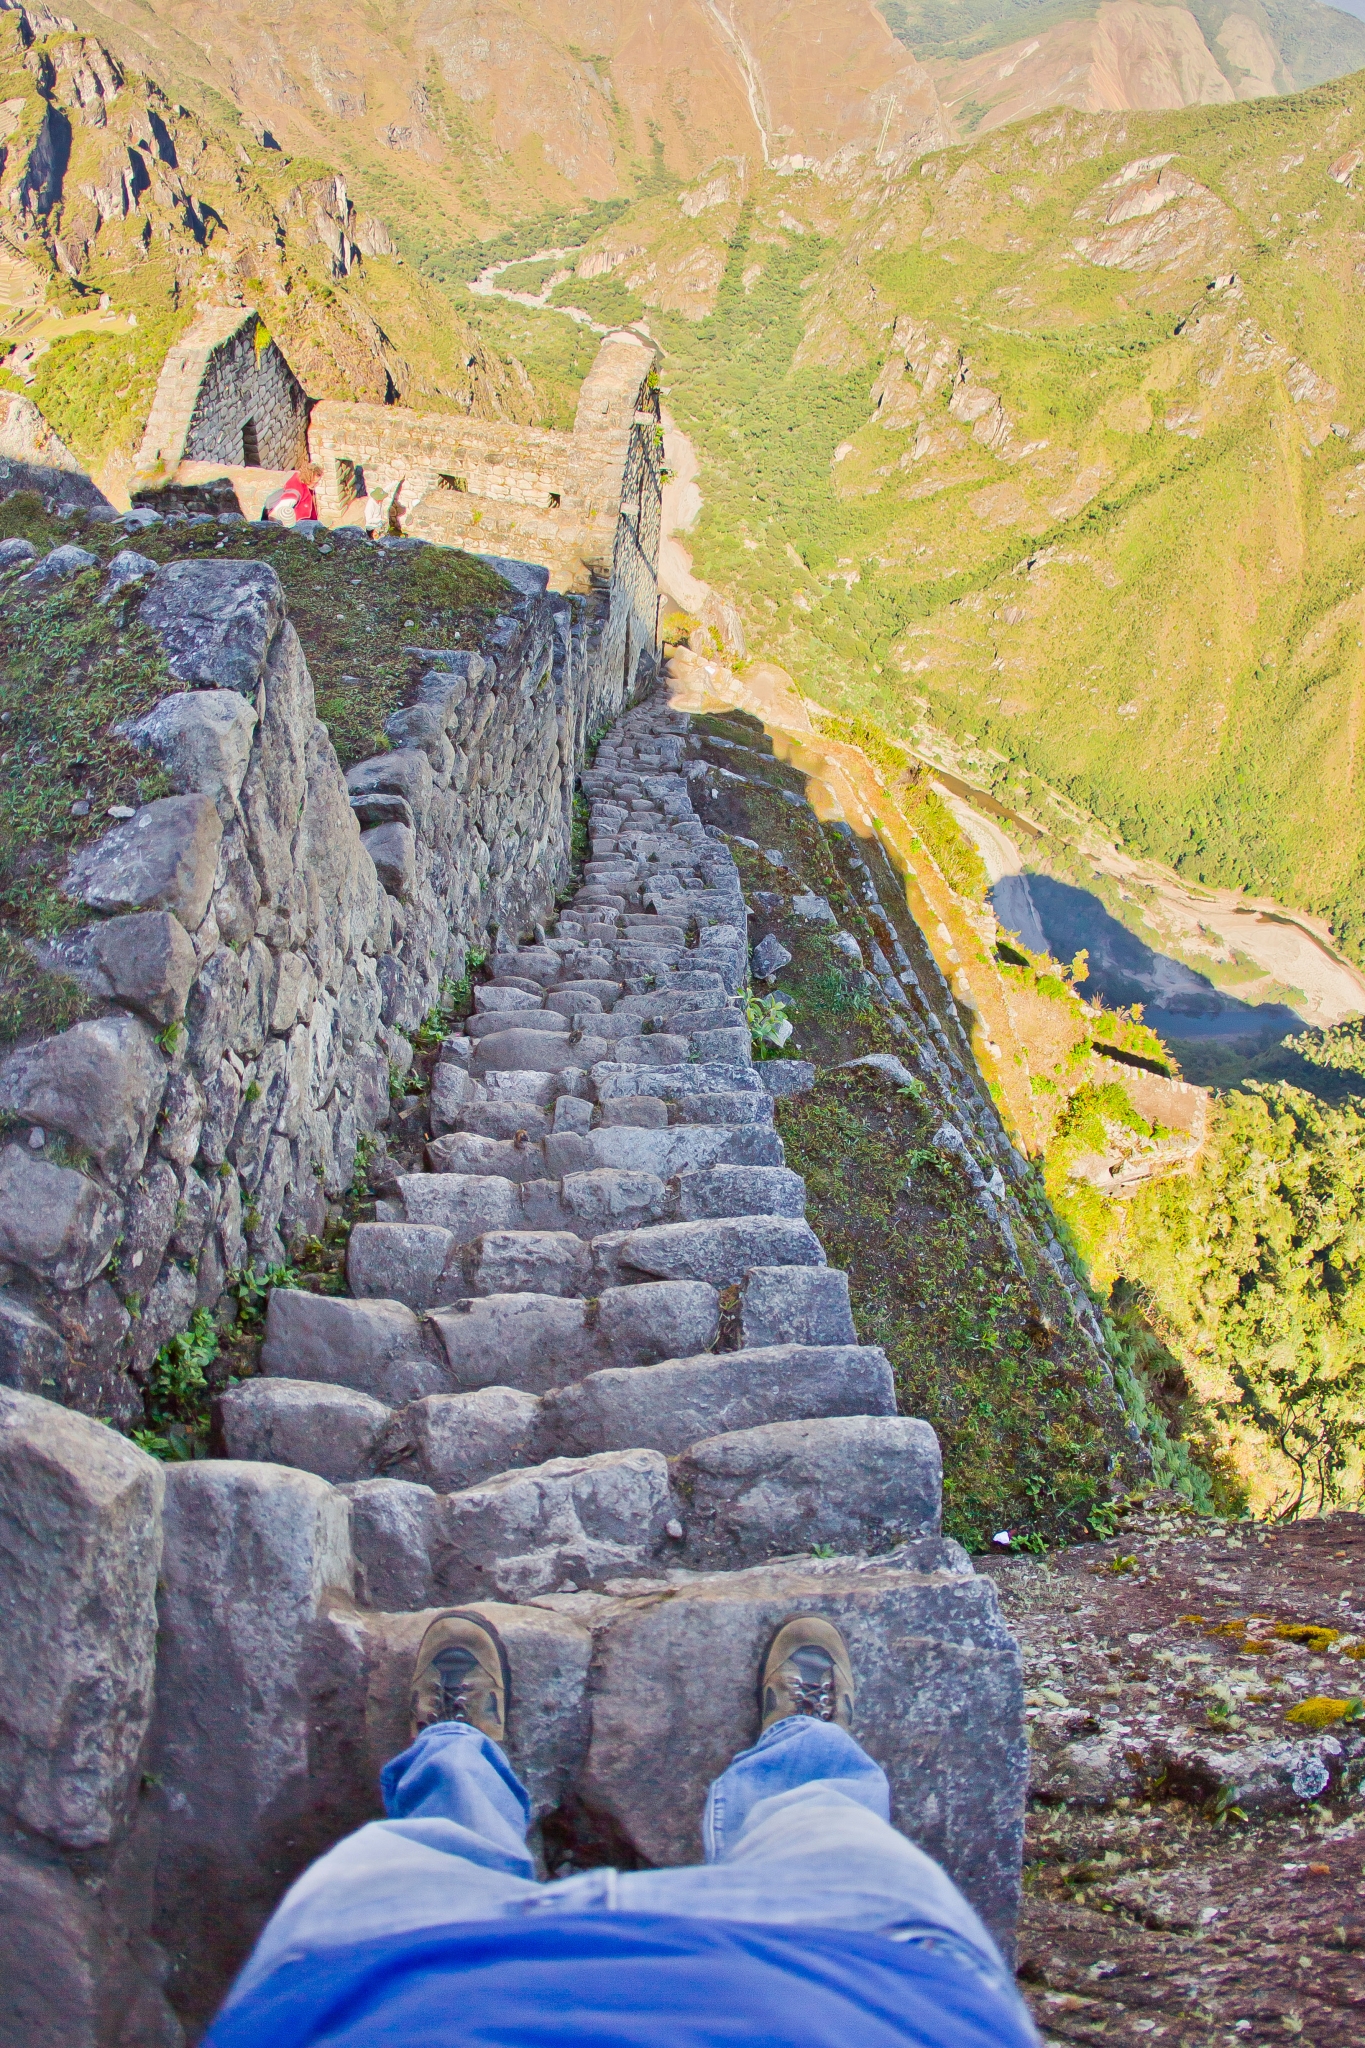 World's scariest stairs: Do you dare climb their steps?